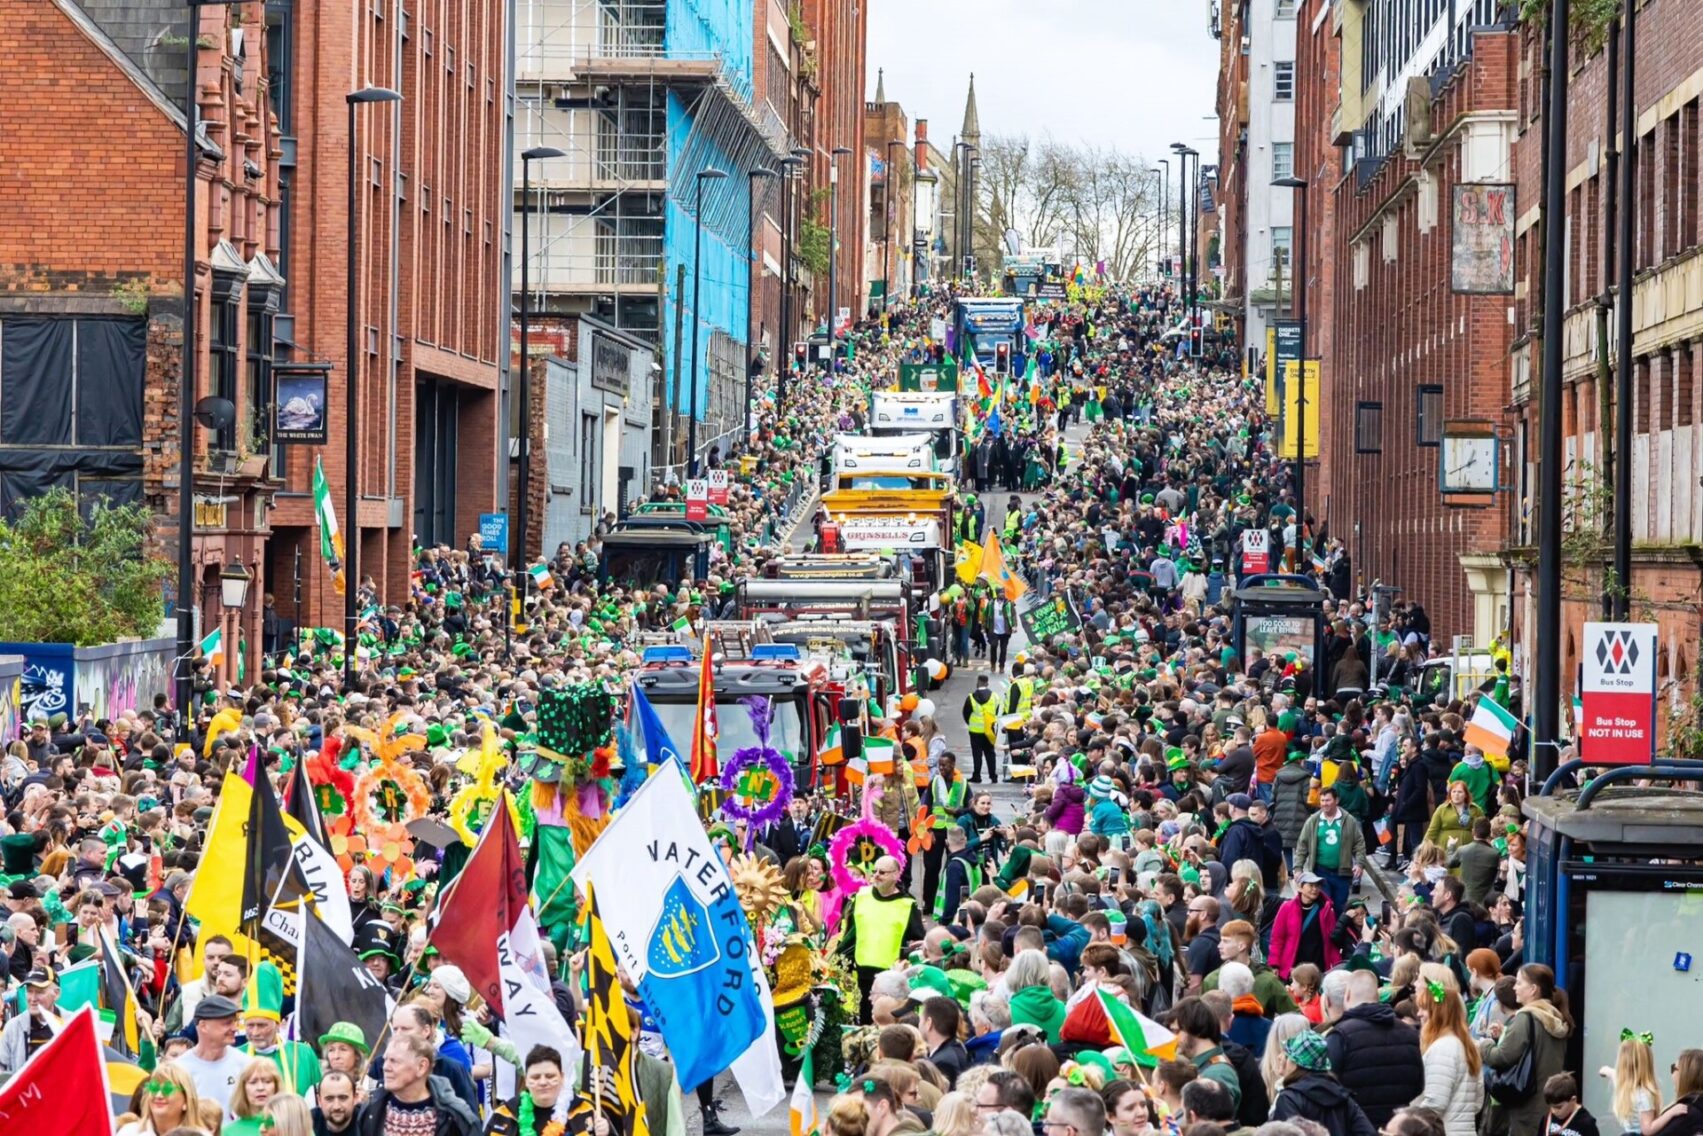 Birmingham’s St. Patrick’s Day parade returned on 17th March, which celebrated the 50th year of the parade.